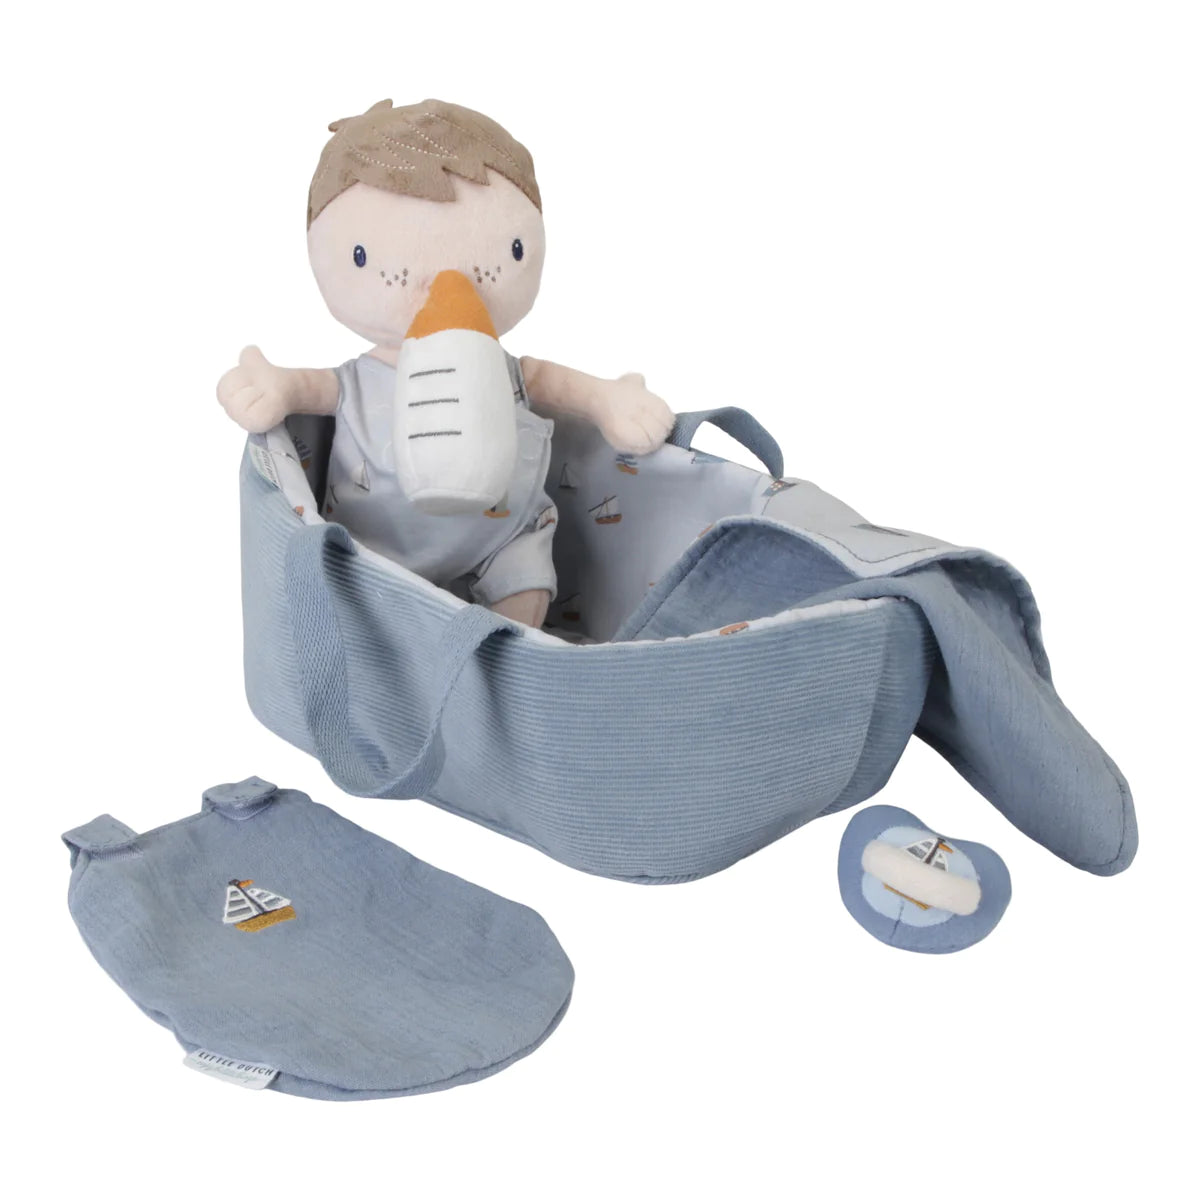 Little Dutch Baby Jim Doll with magnetic bottle, sleeping bag, magnetic dummy and blanket